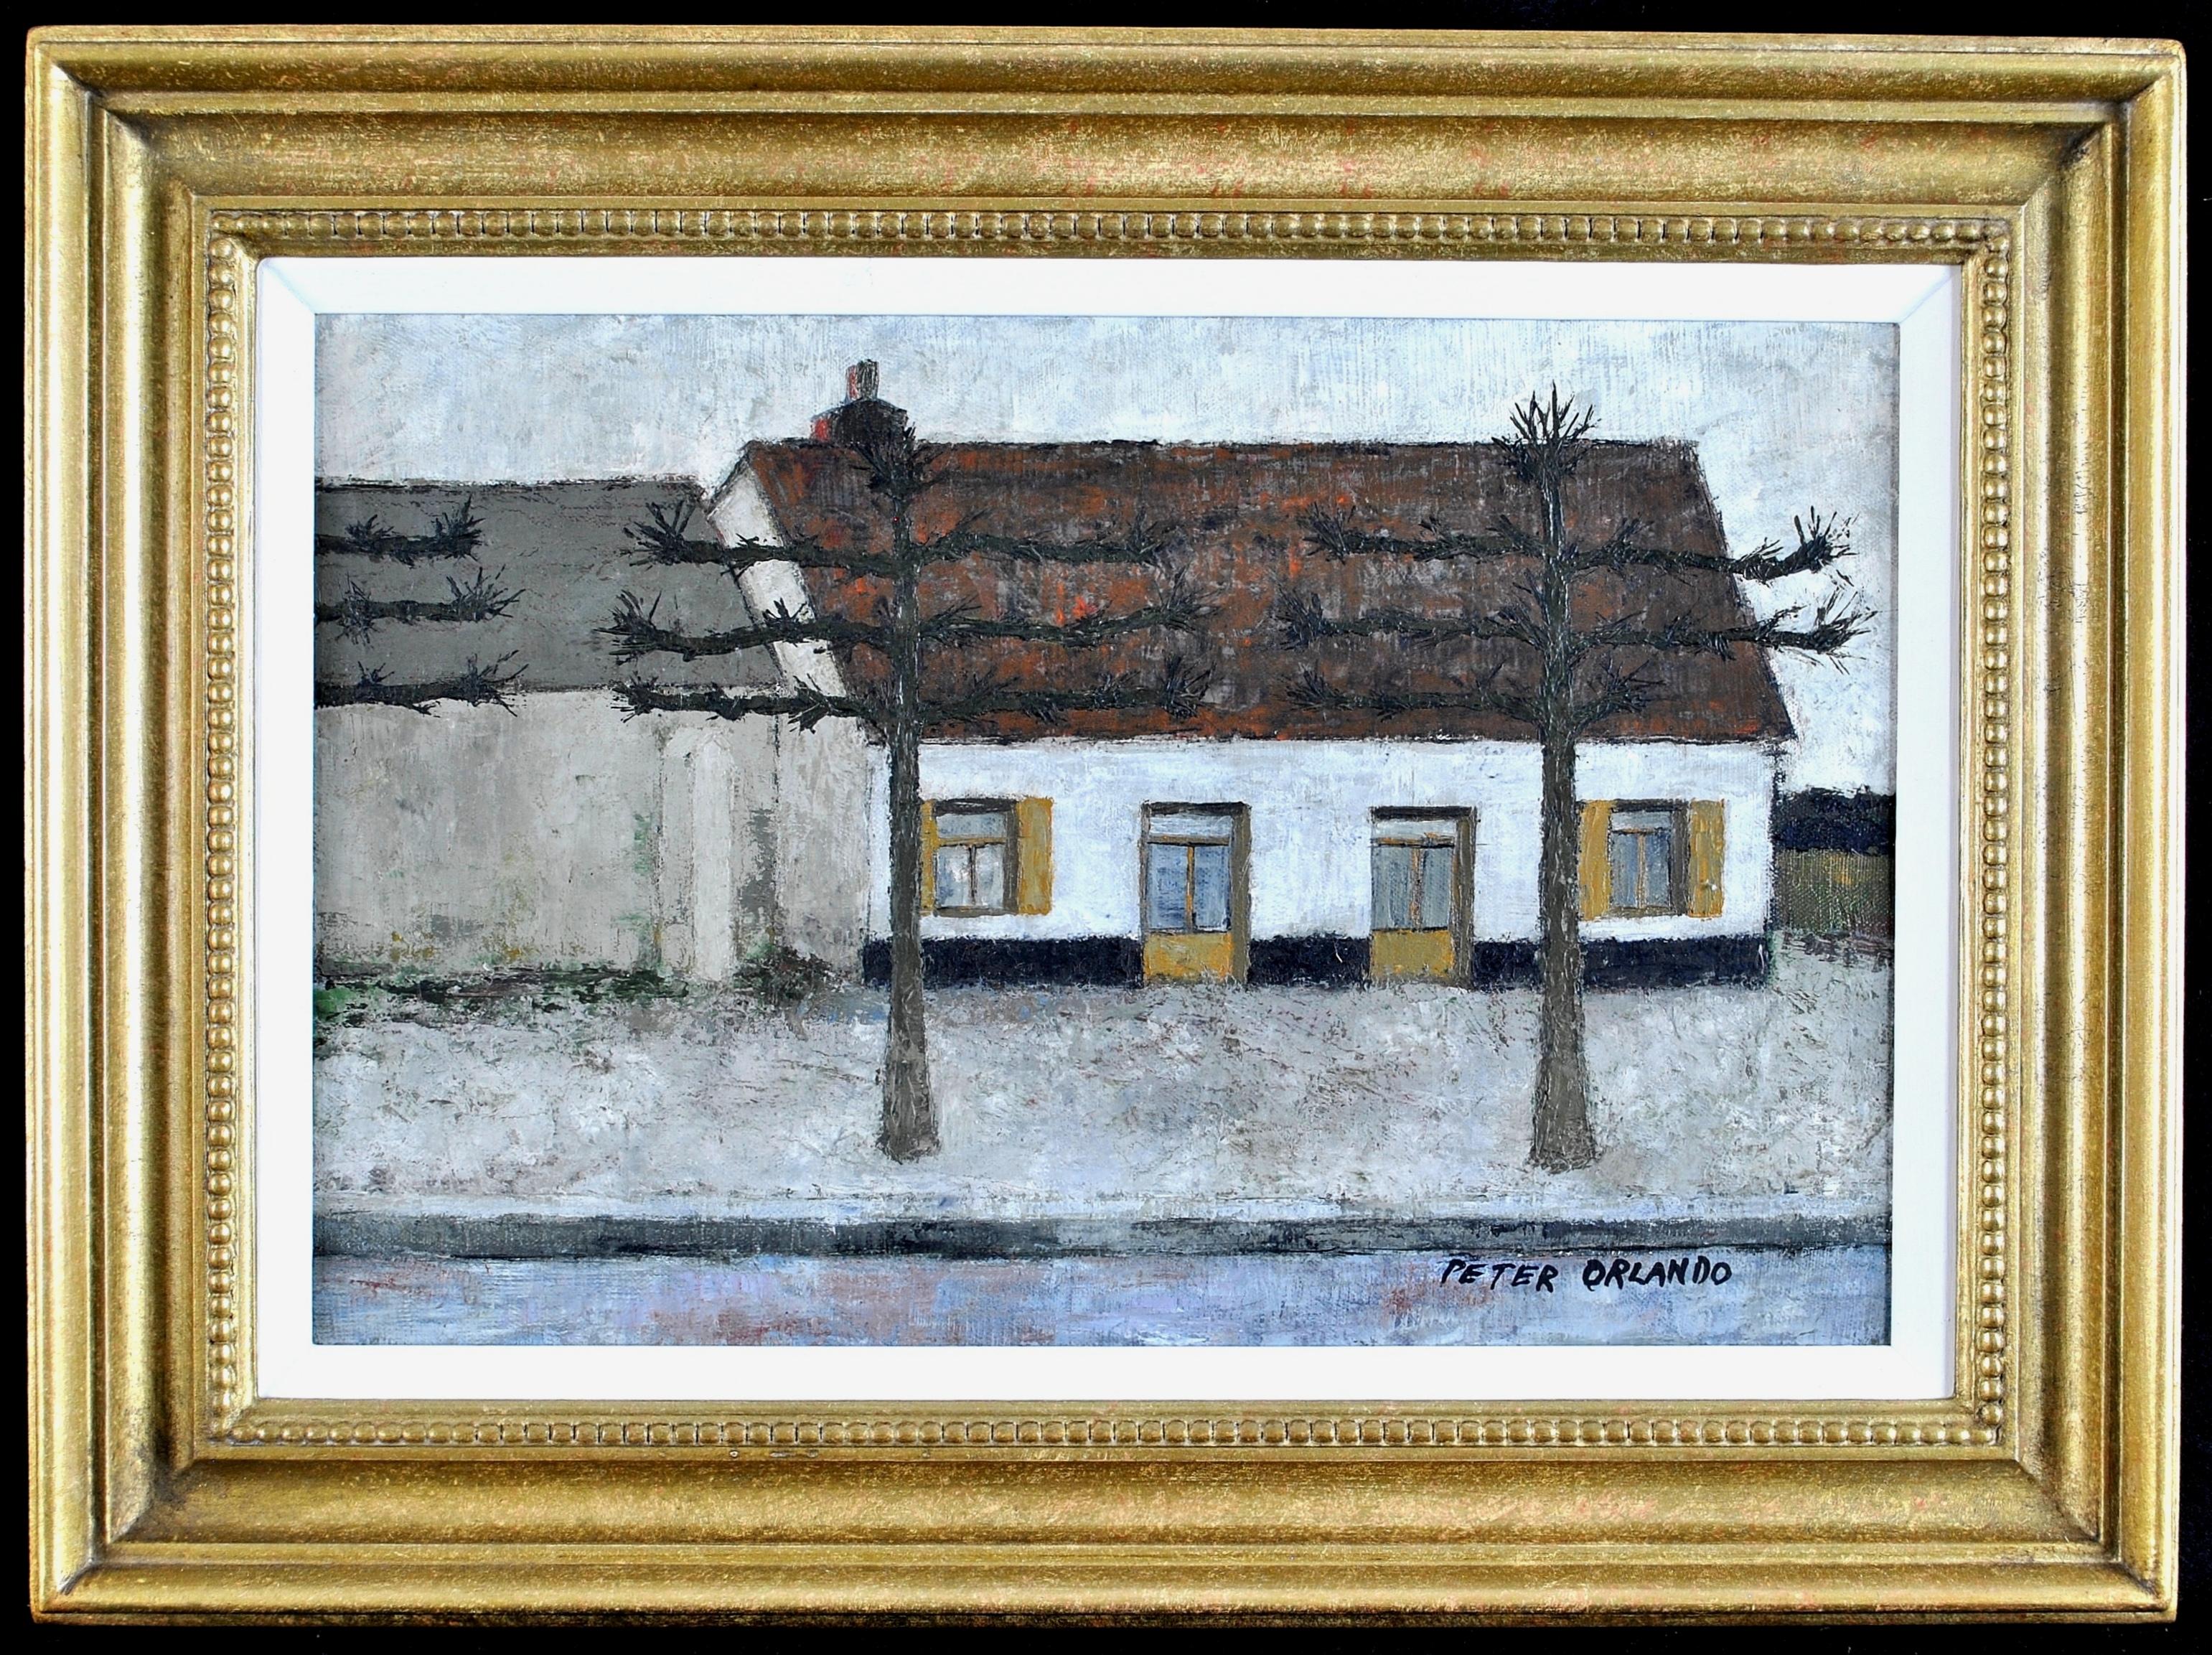 Peter Orlando  Landscape Painting - The White House - Mid 20th Century French Naif Street Scene Oil Painting